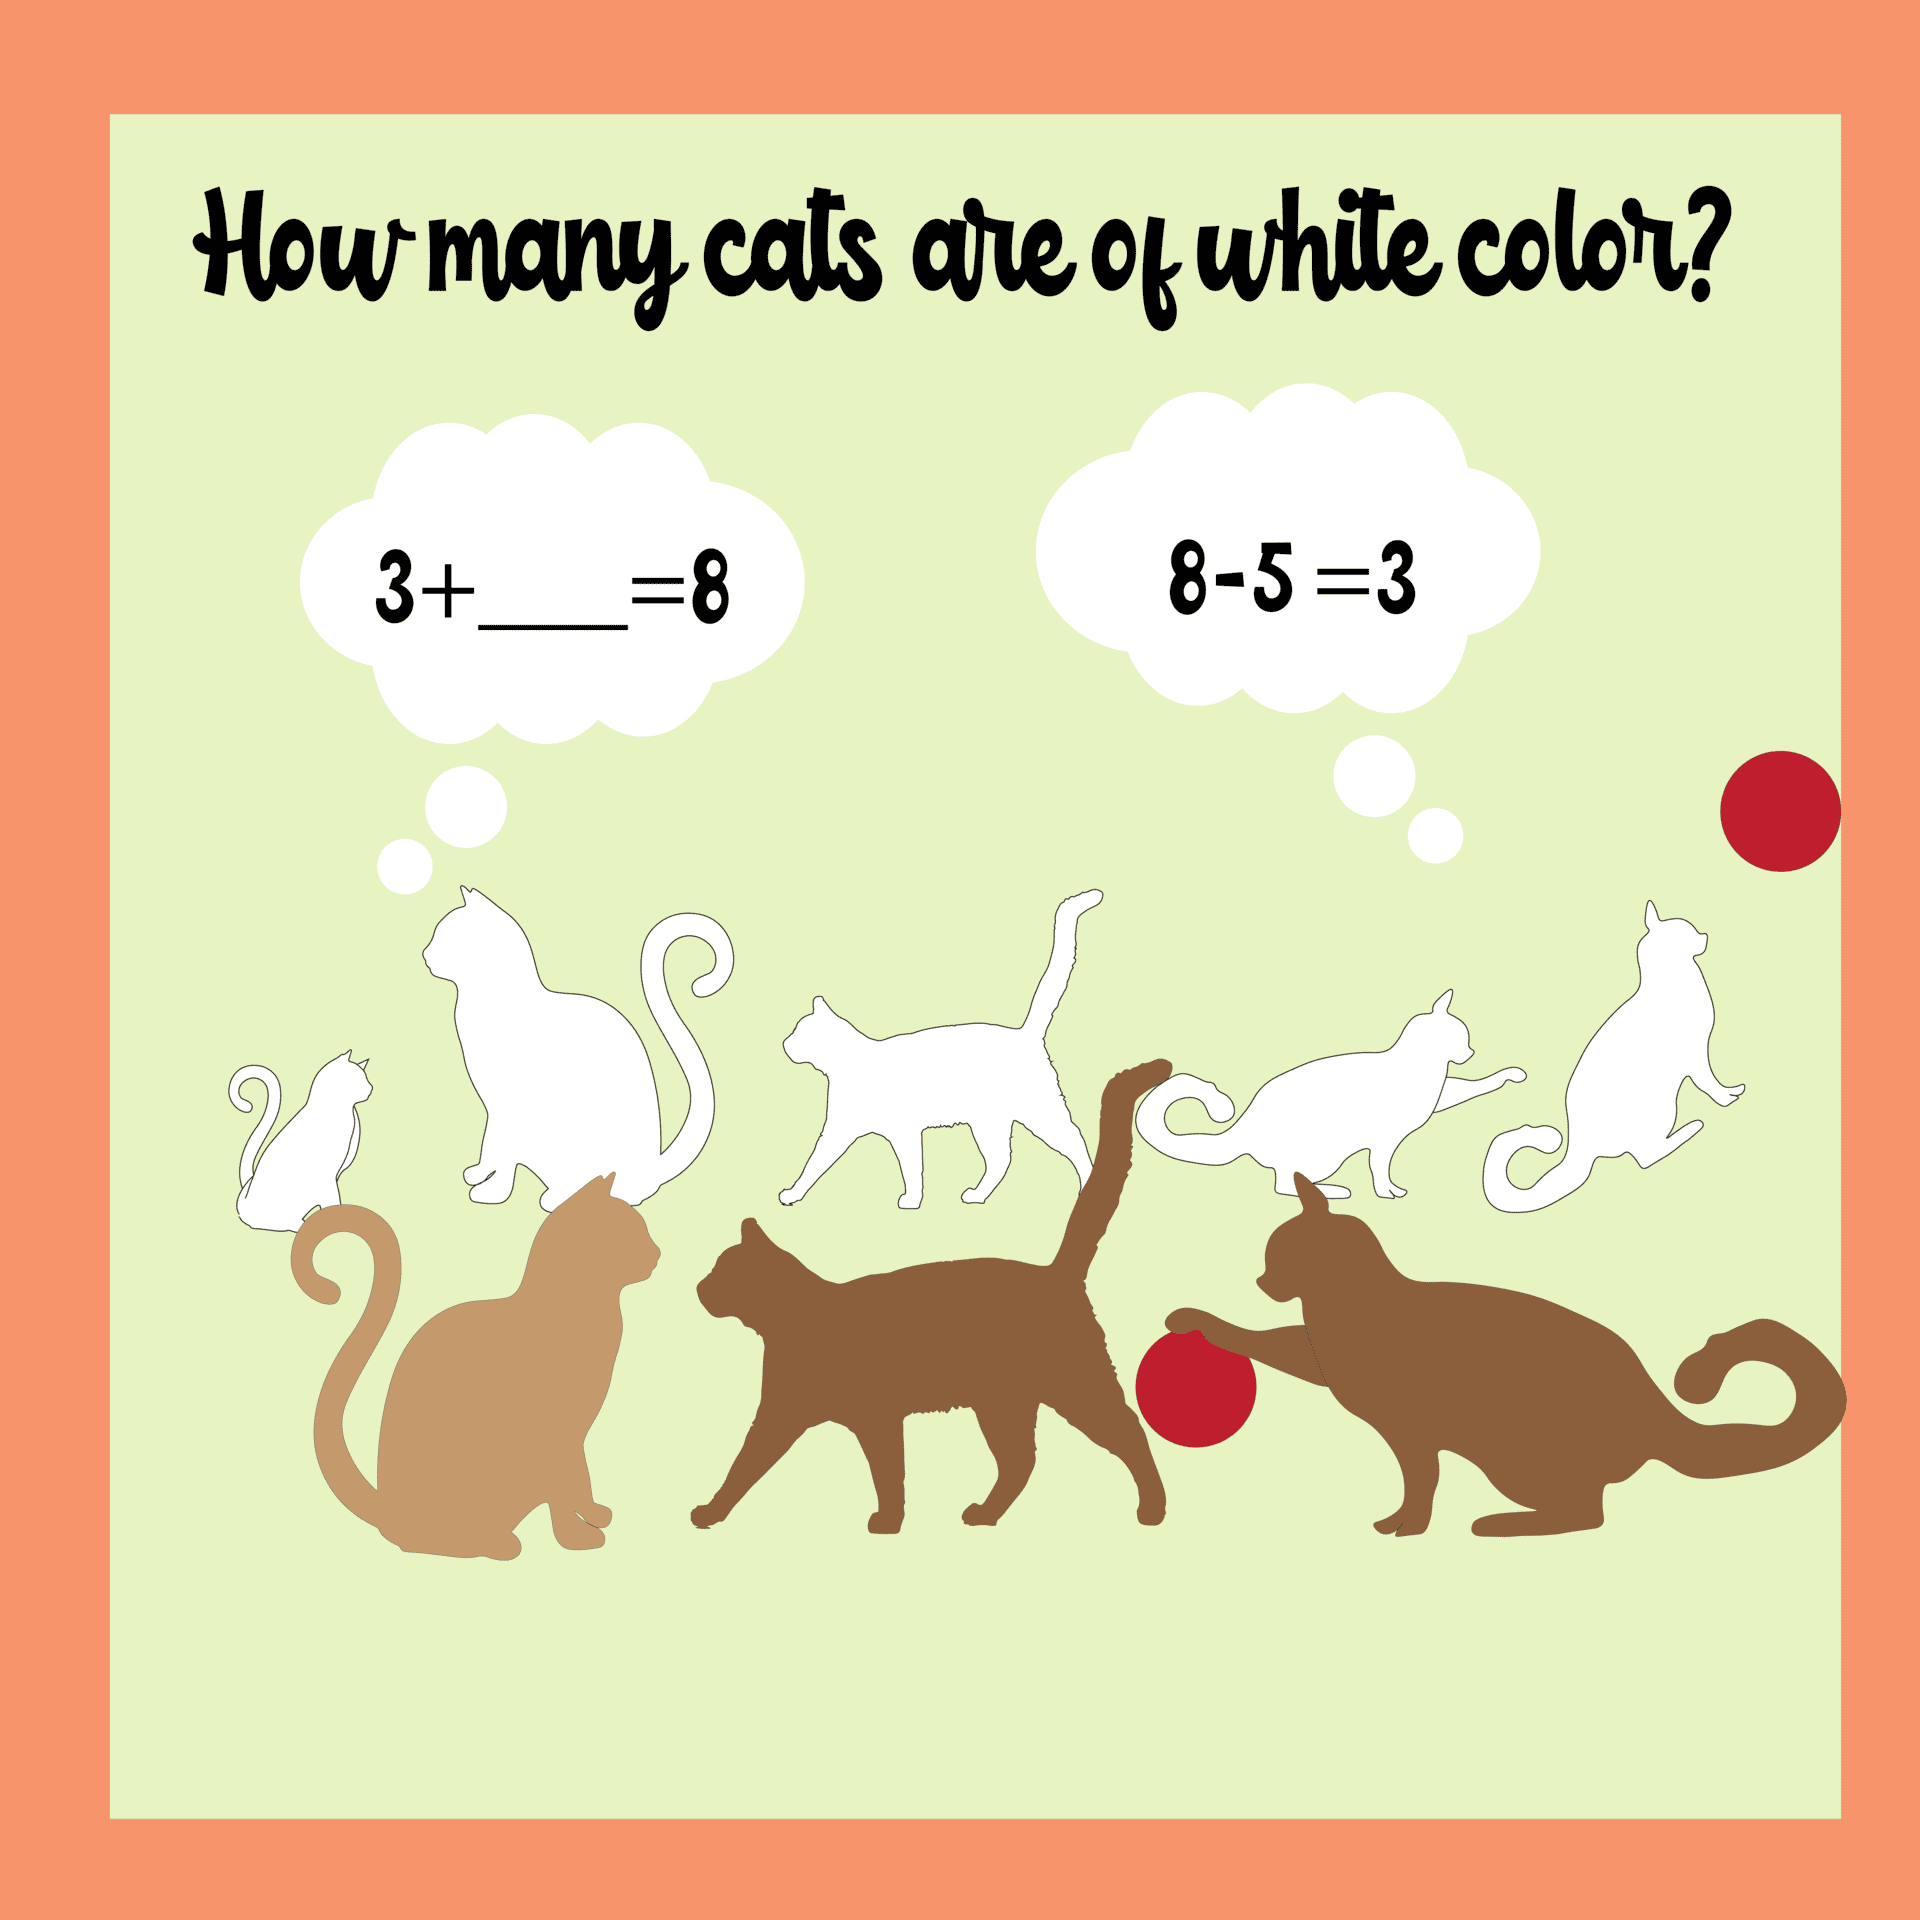 Counting Number of White Cats through Missing Addends